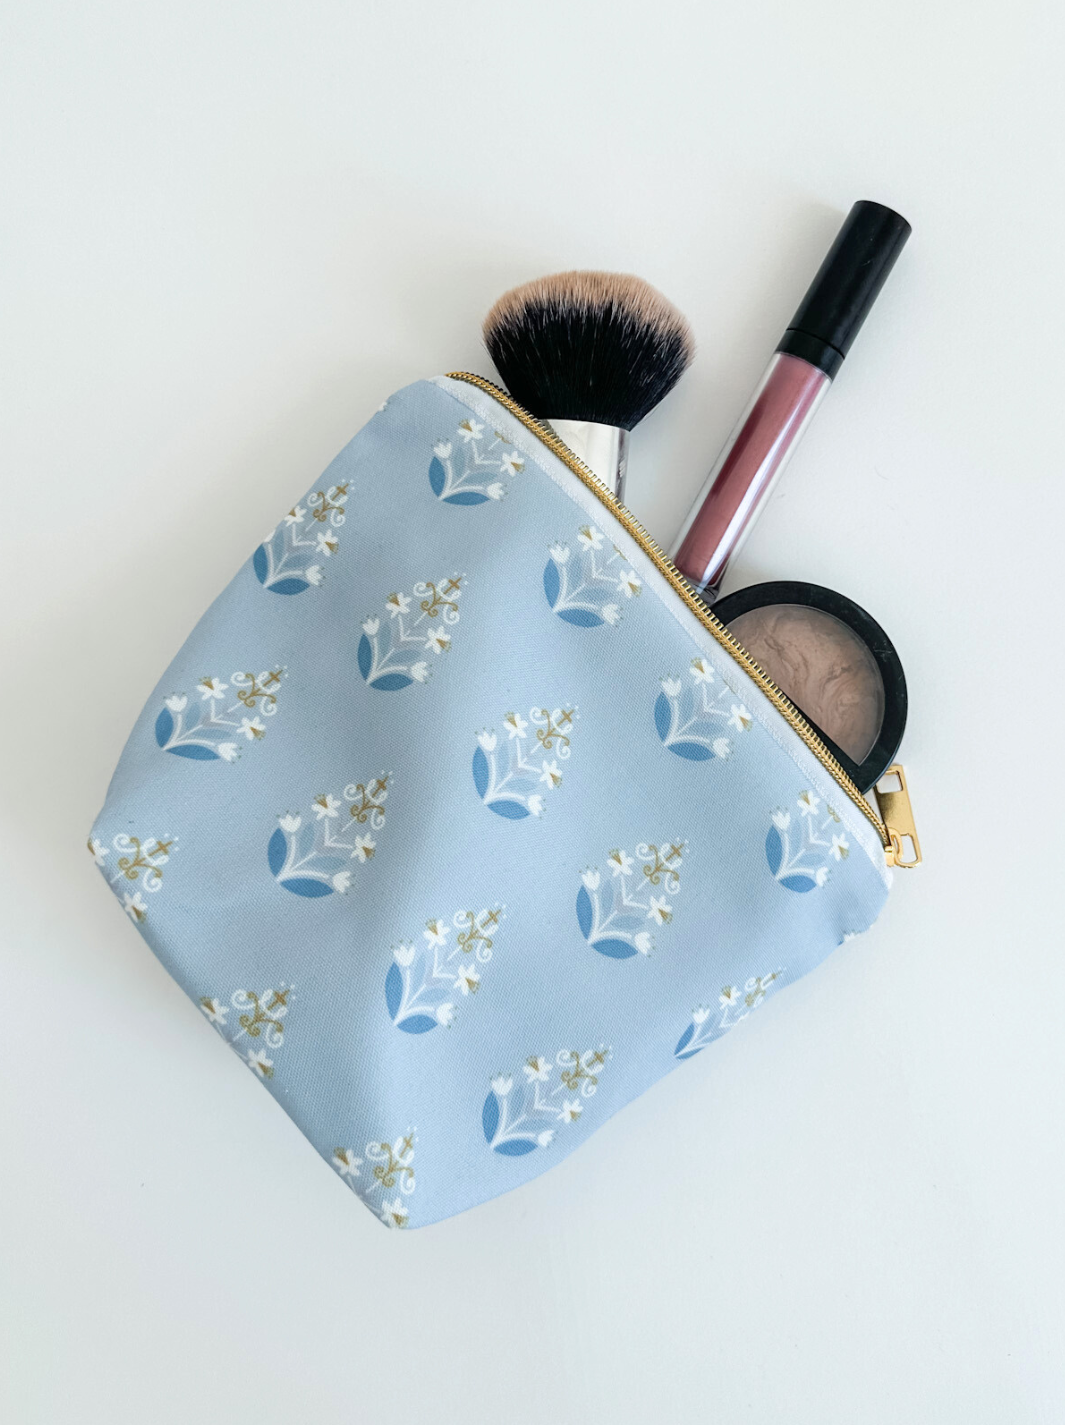 Ave Maria Cosmetic Bag